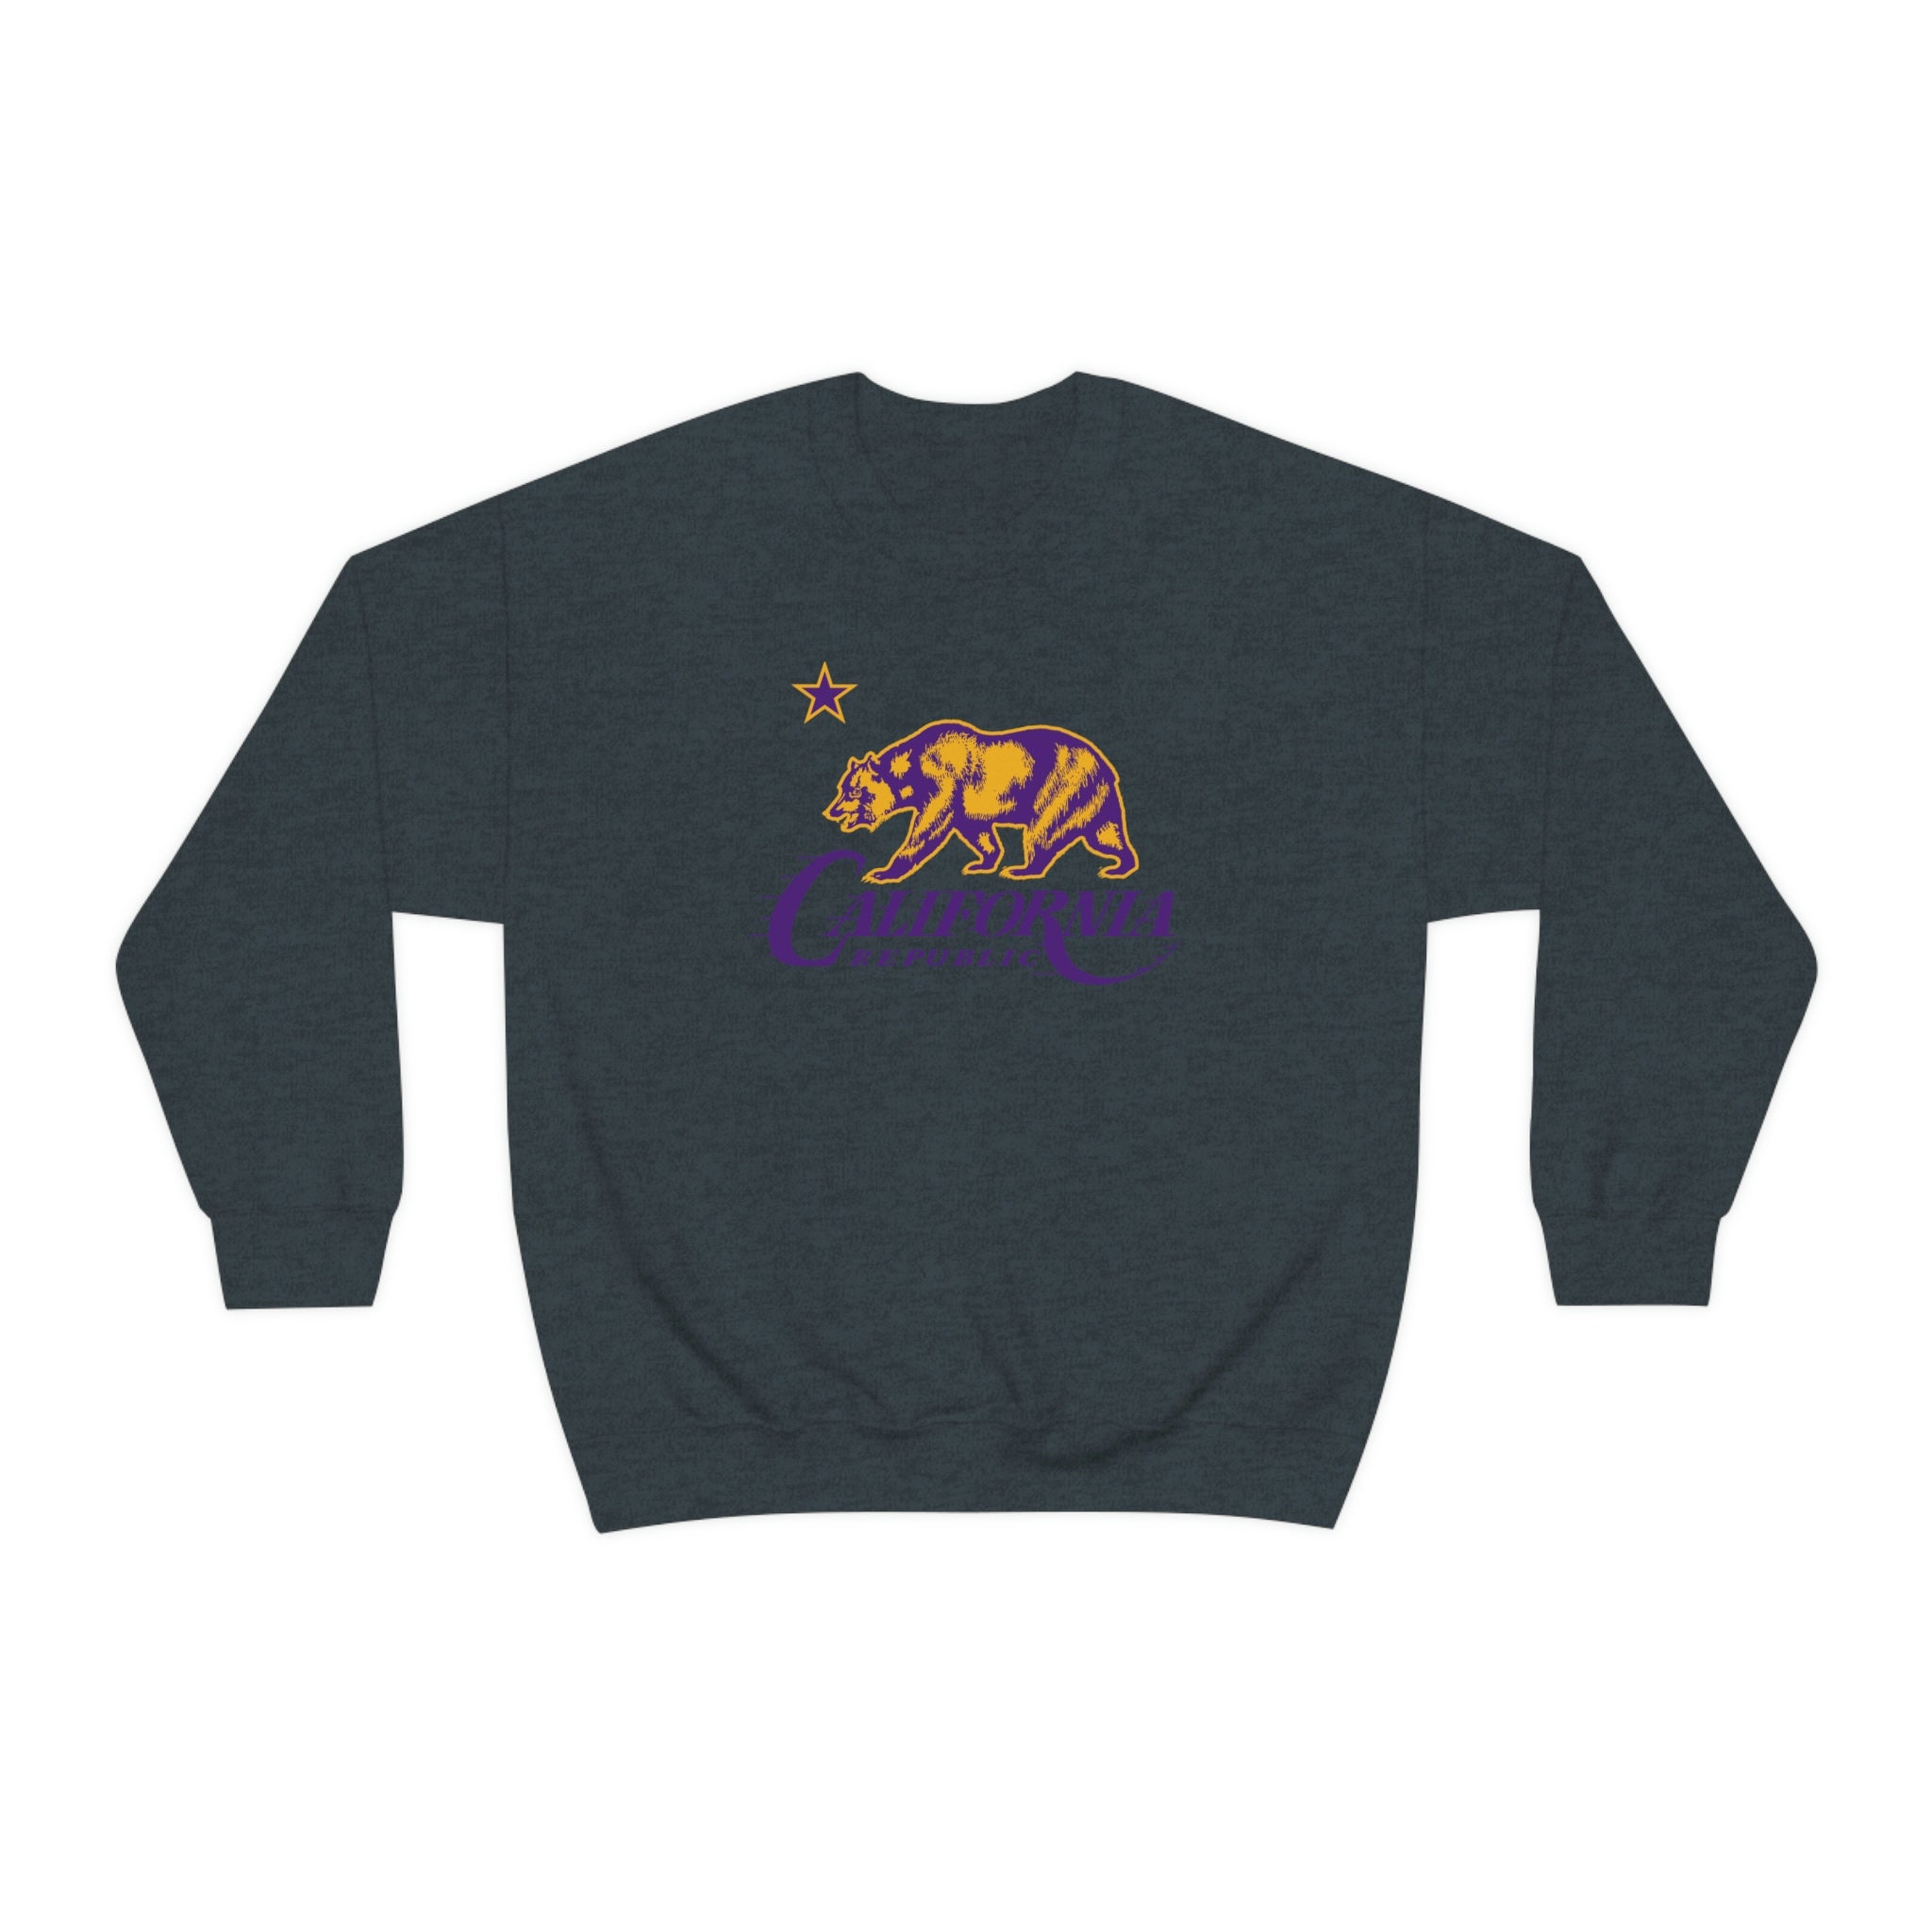 LA Lakers Ugly Christmas Sweater For Men And Women - chemitshirt